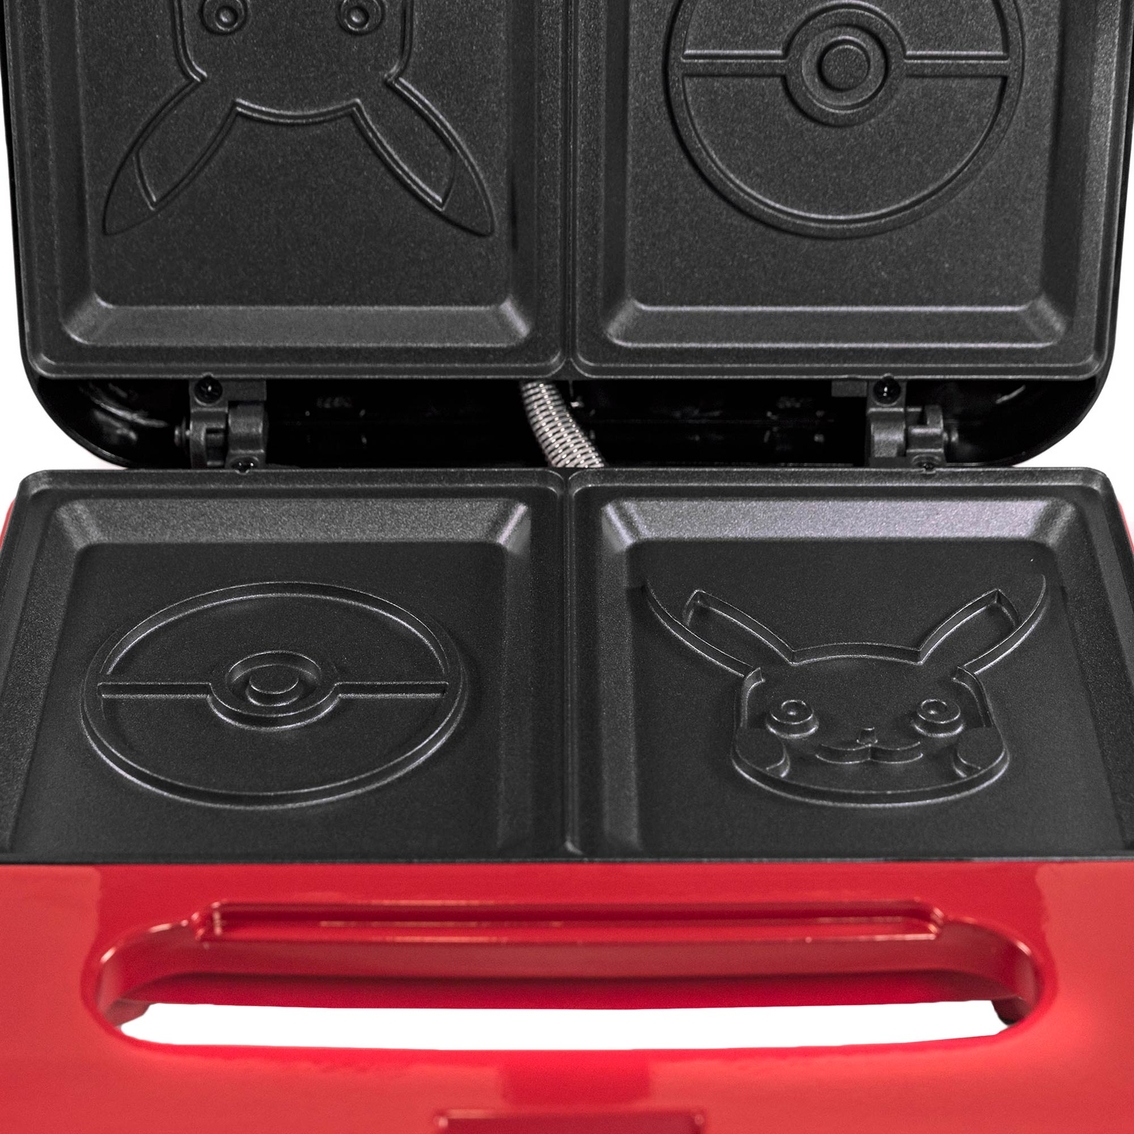 Pokemon Grilled Cheese Maker - Image 3 of 10